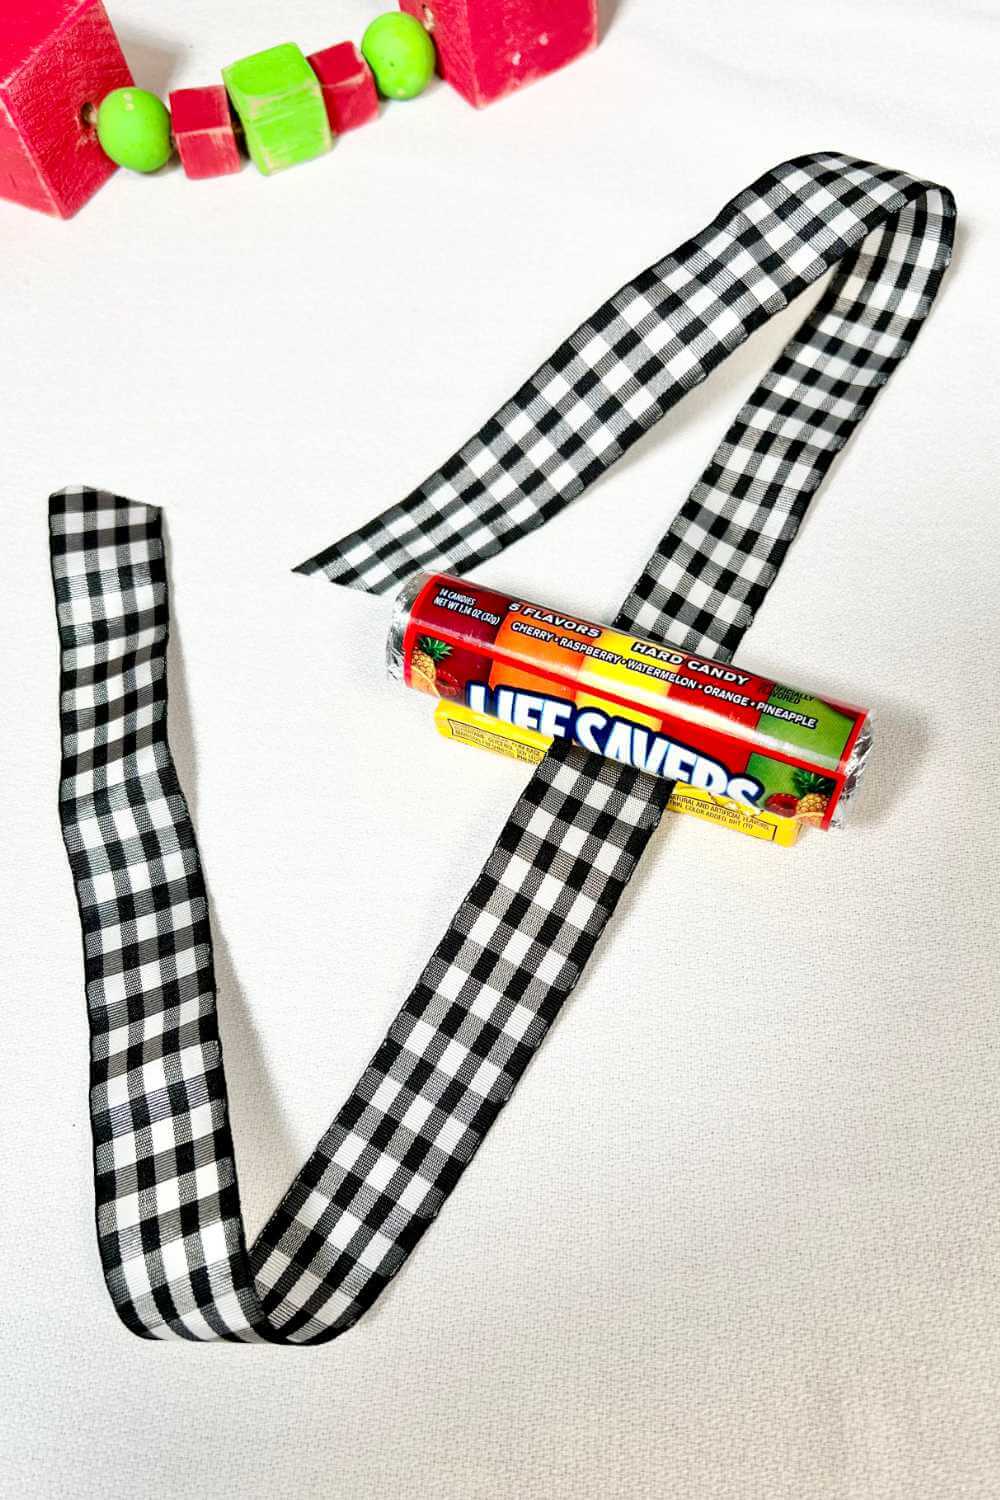 Lifesavers adhered to a pack of gum with a ribbon to make a candy train ornament.